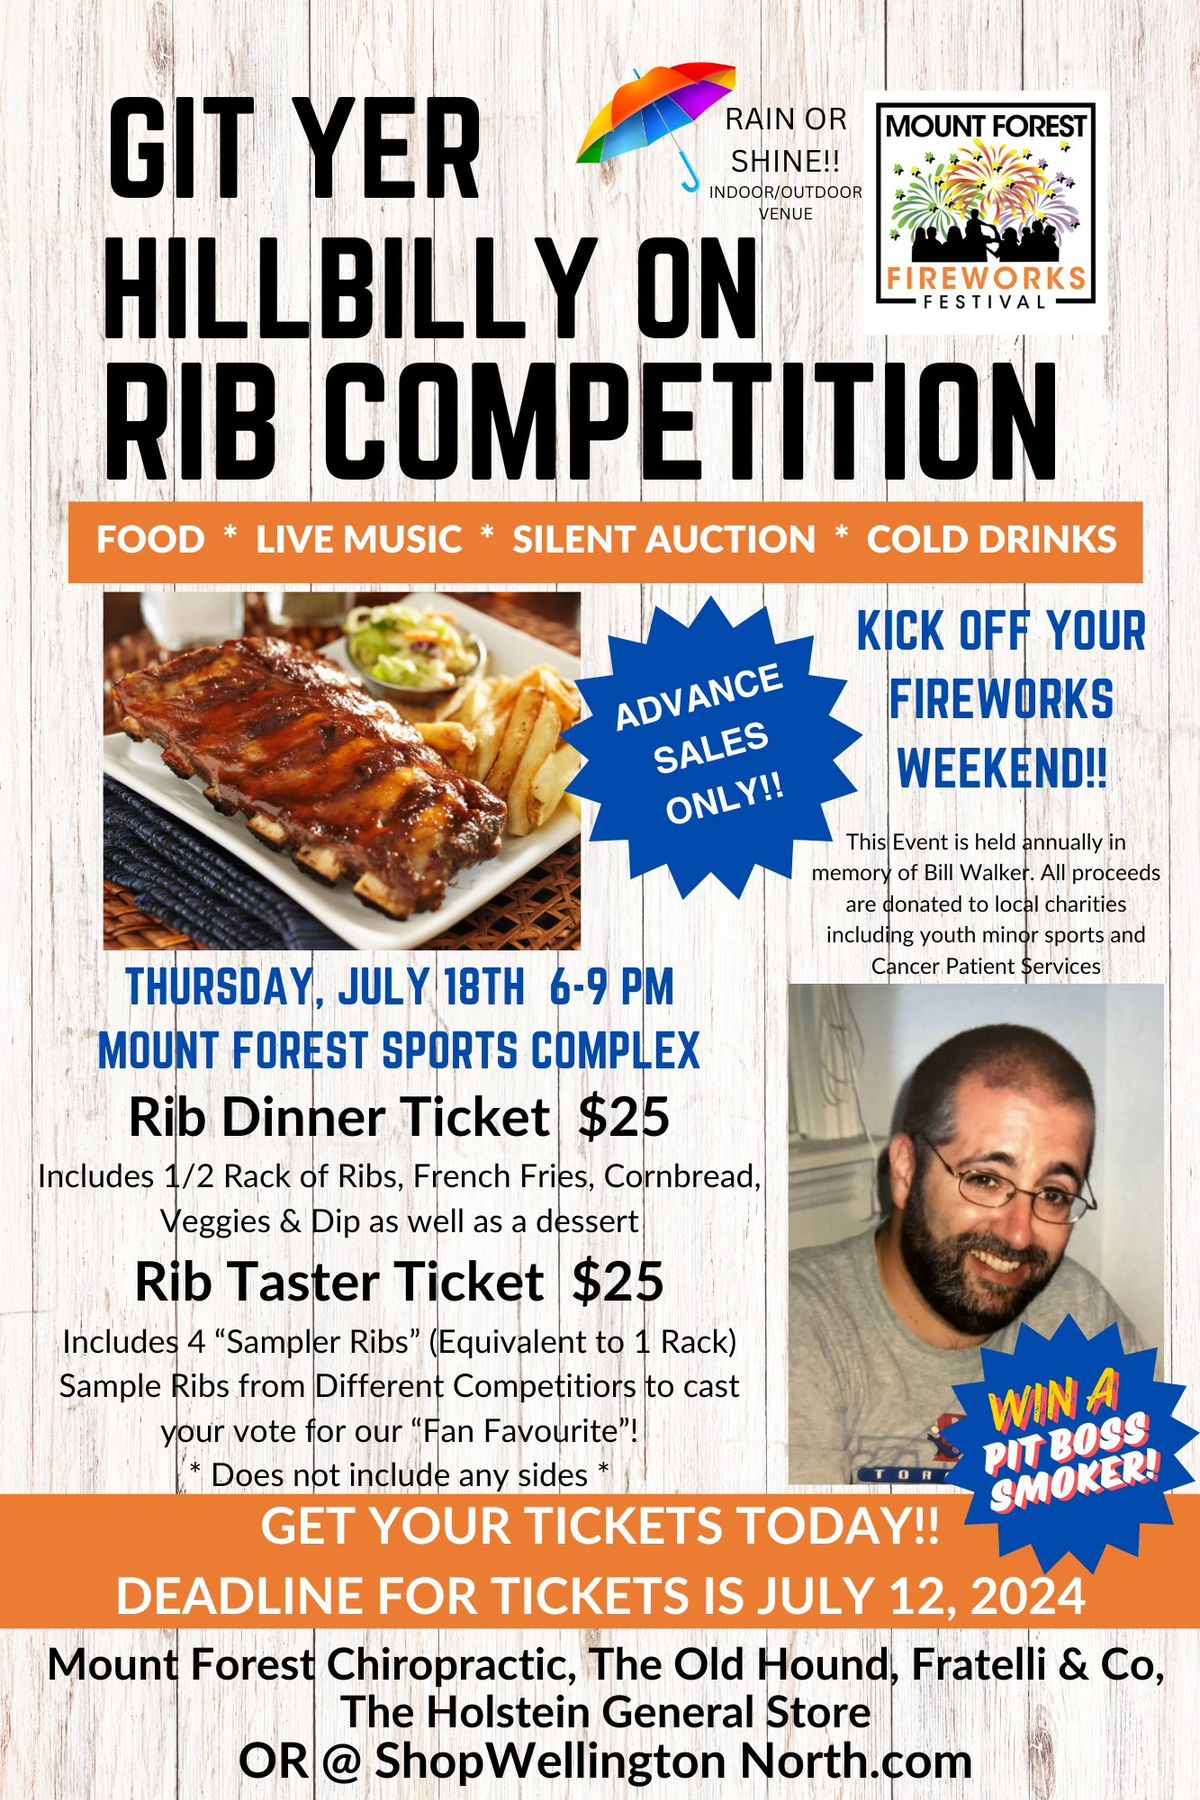 Mount Forest RibFest